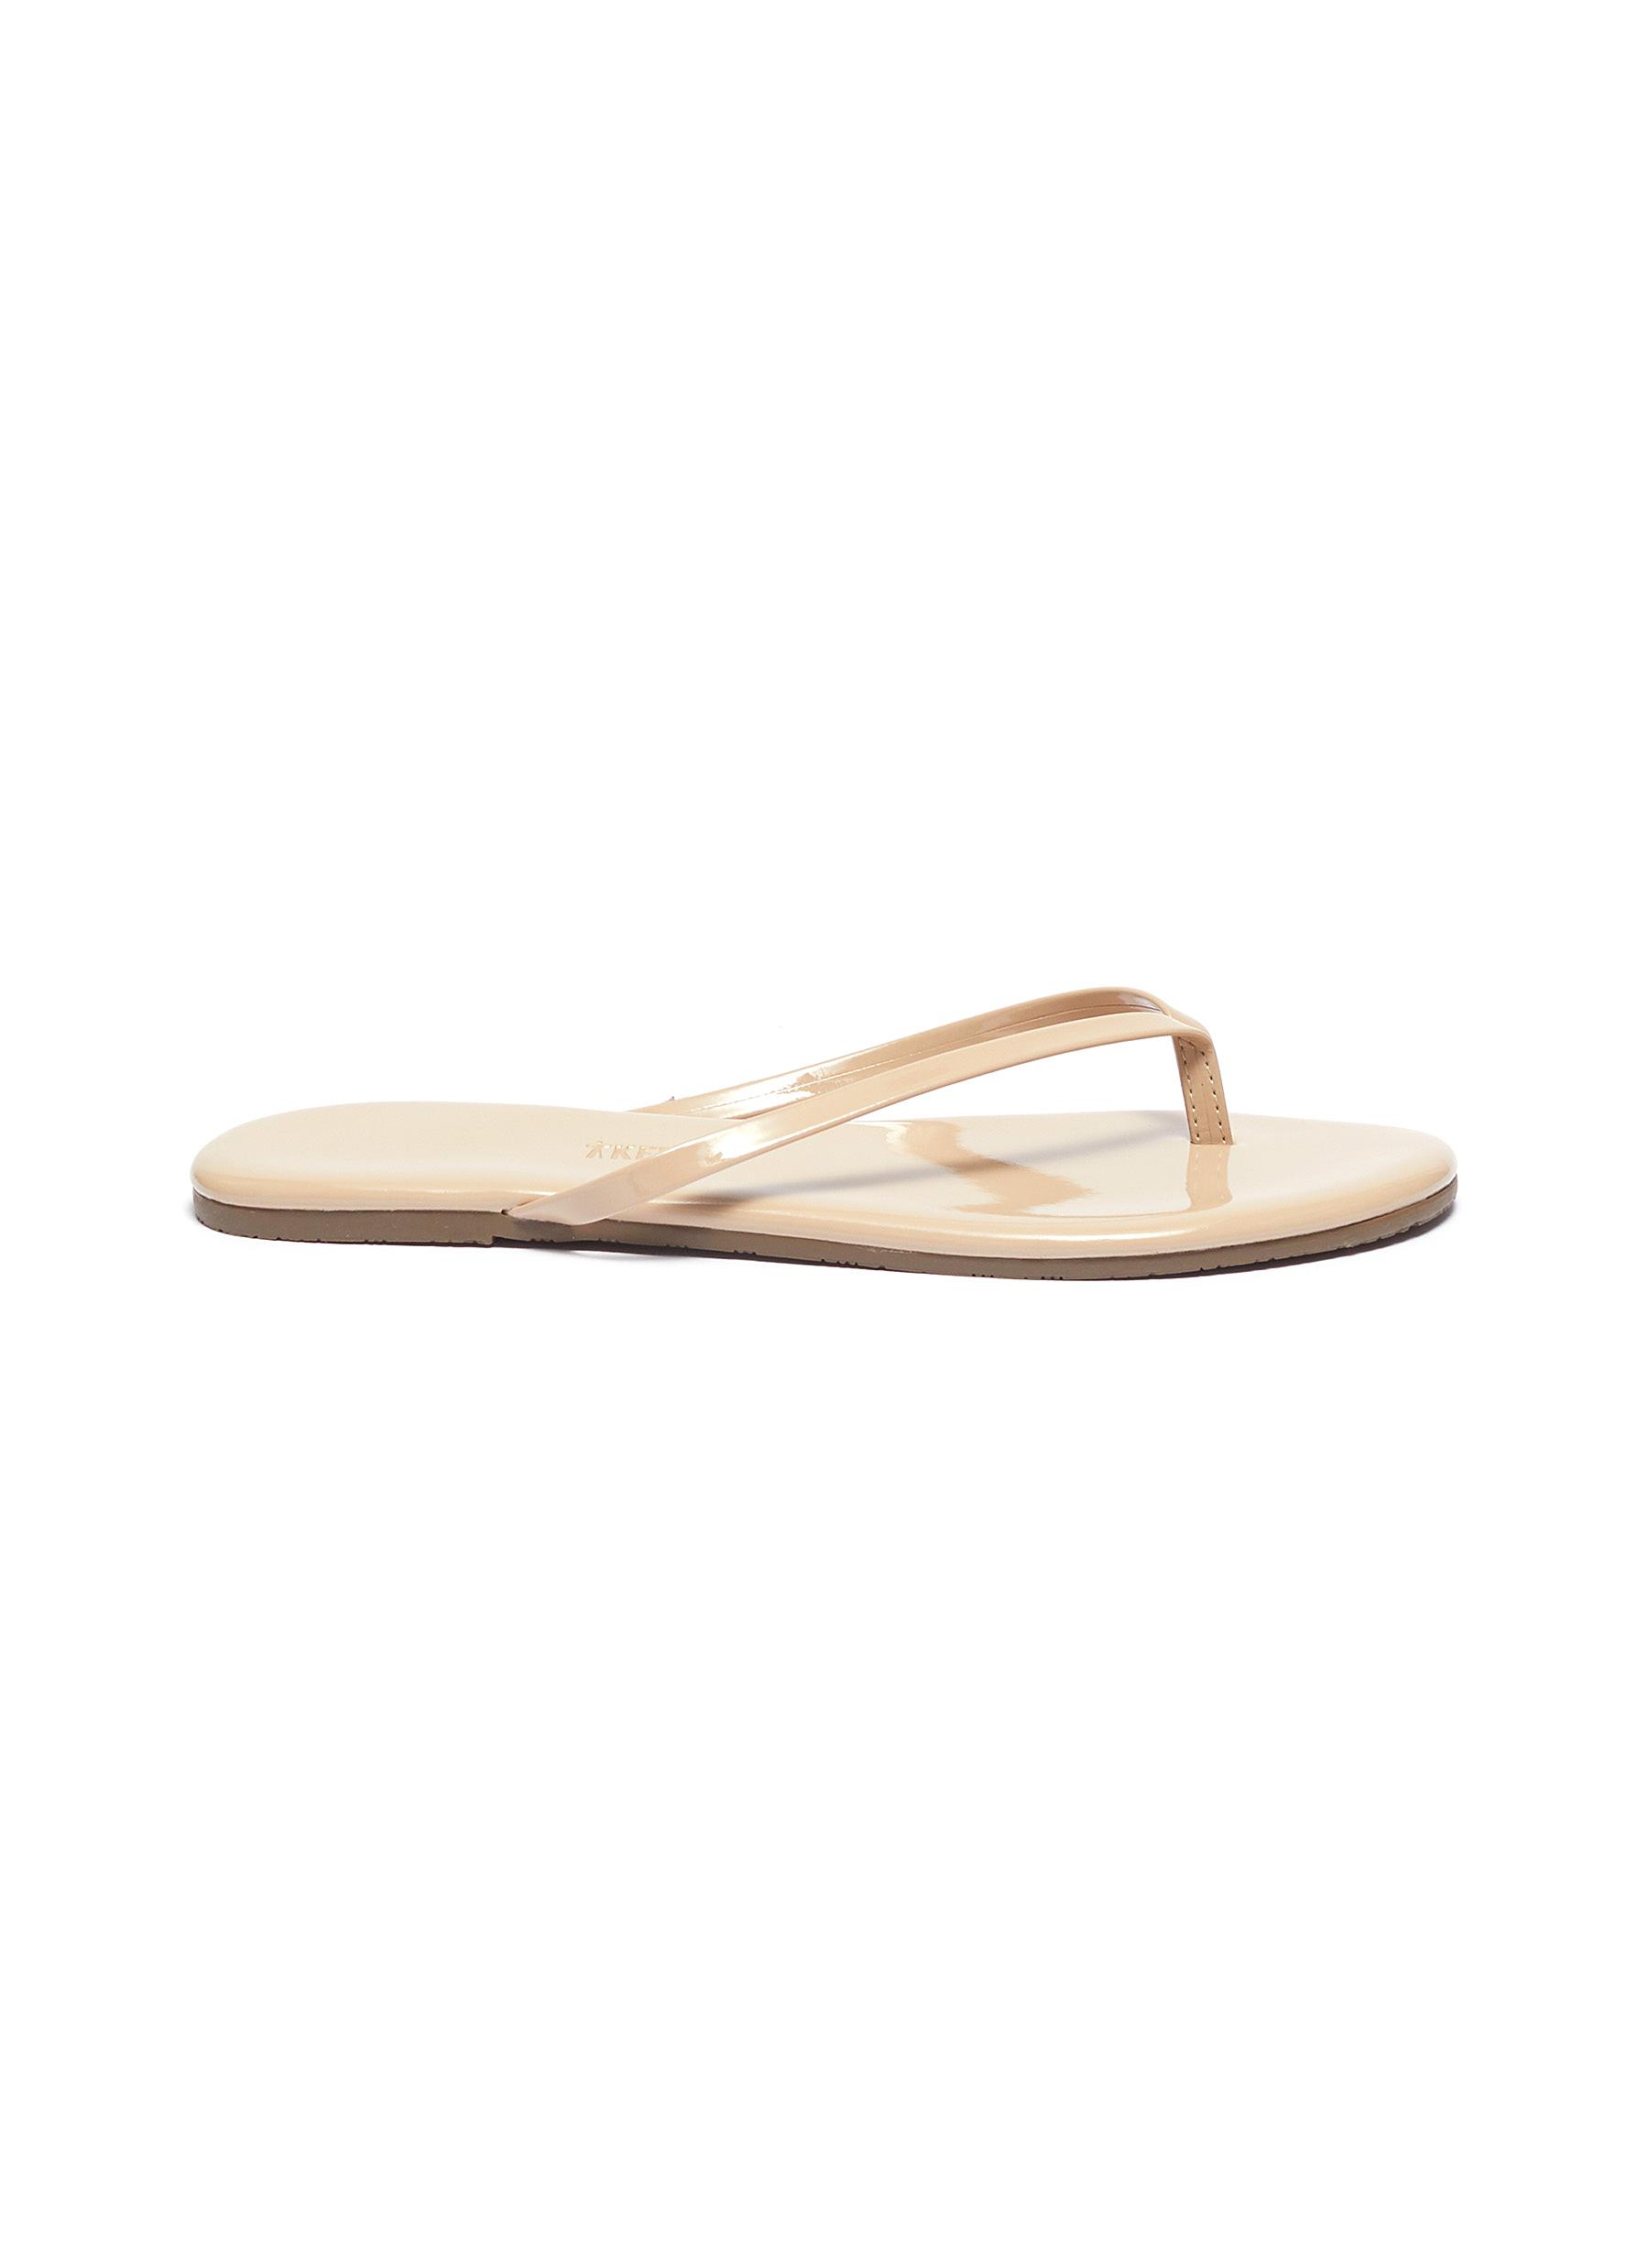 Tkees Flats Foundations leather flip flops